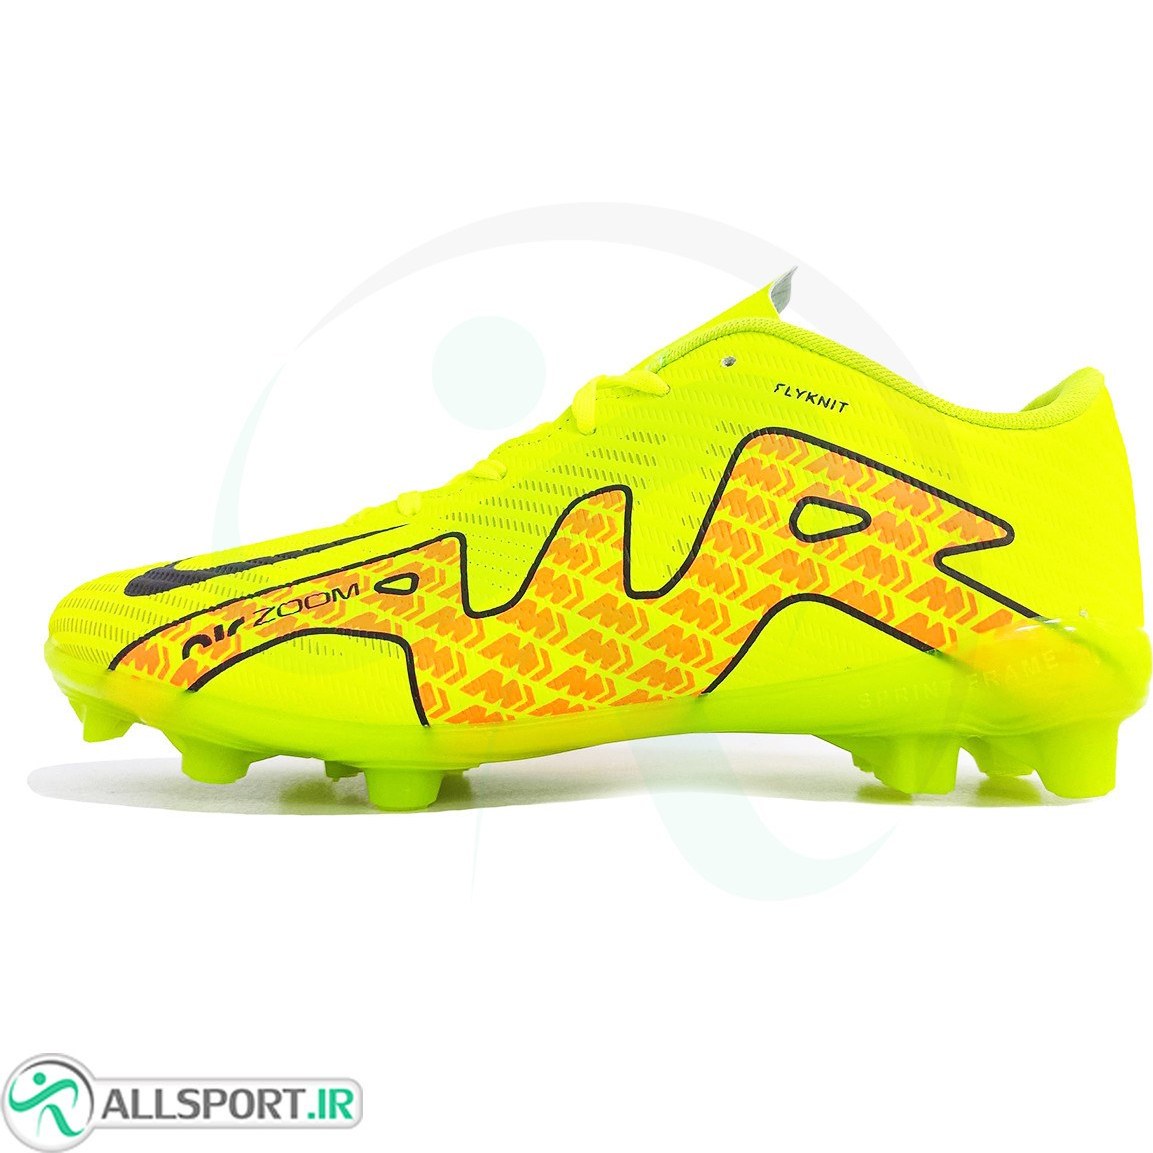 Buying and price of yellow nike football shoes 